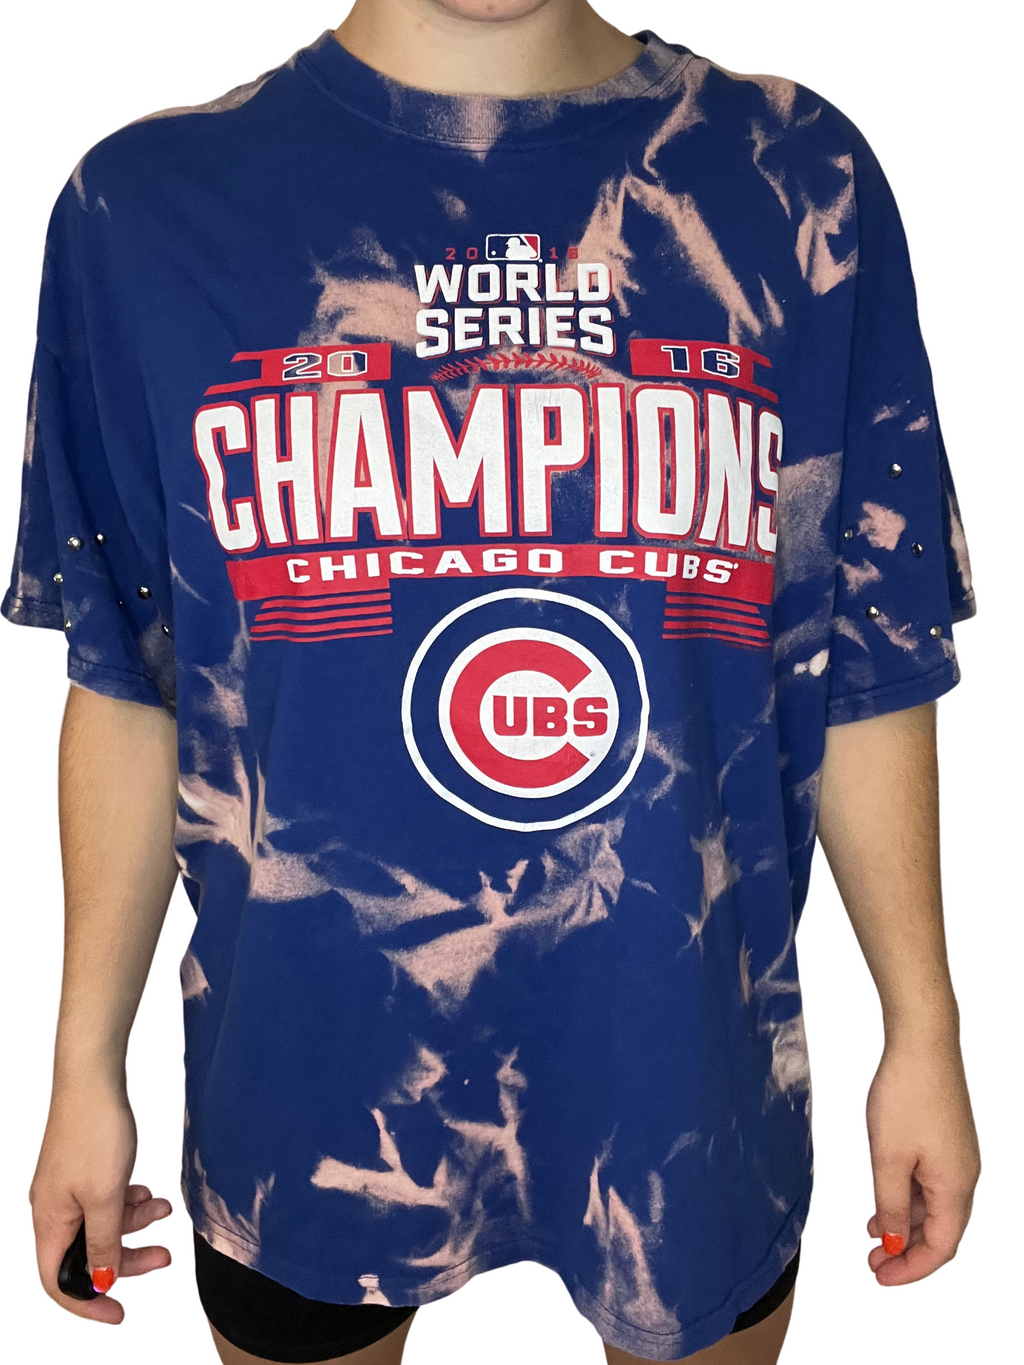 The North Side Cubs Shirt The Northside Cubs